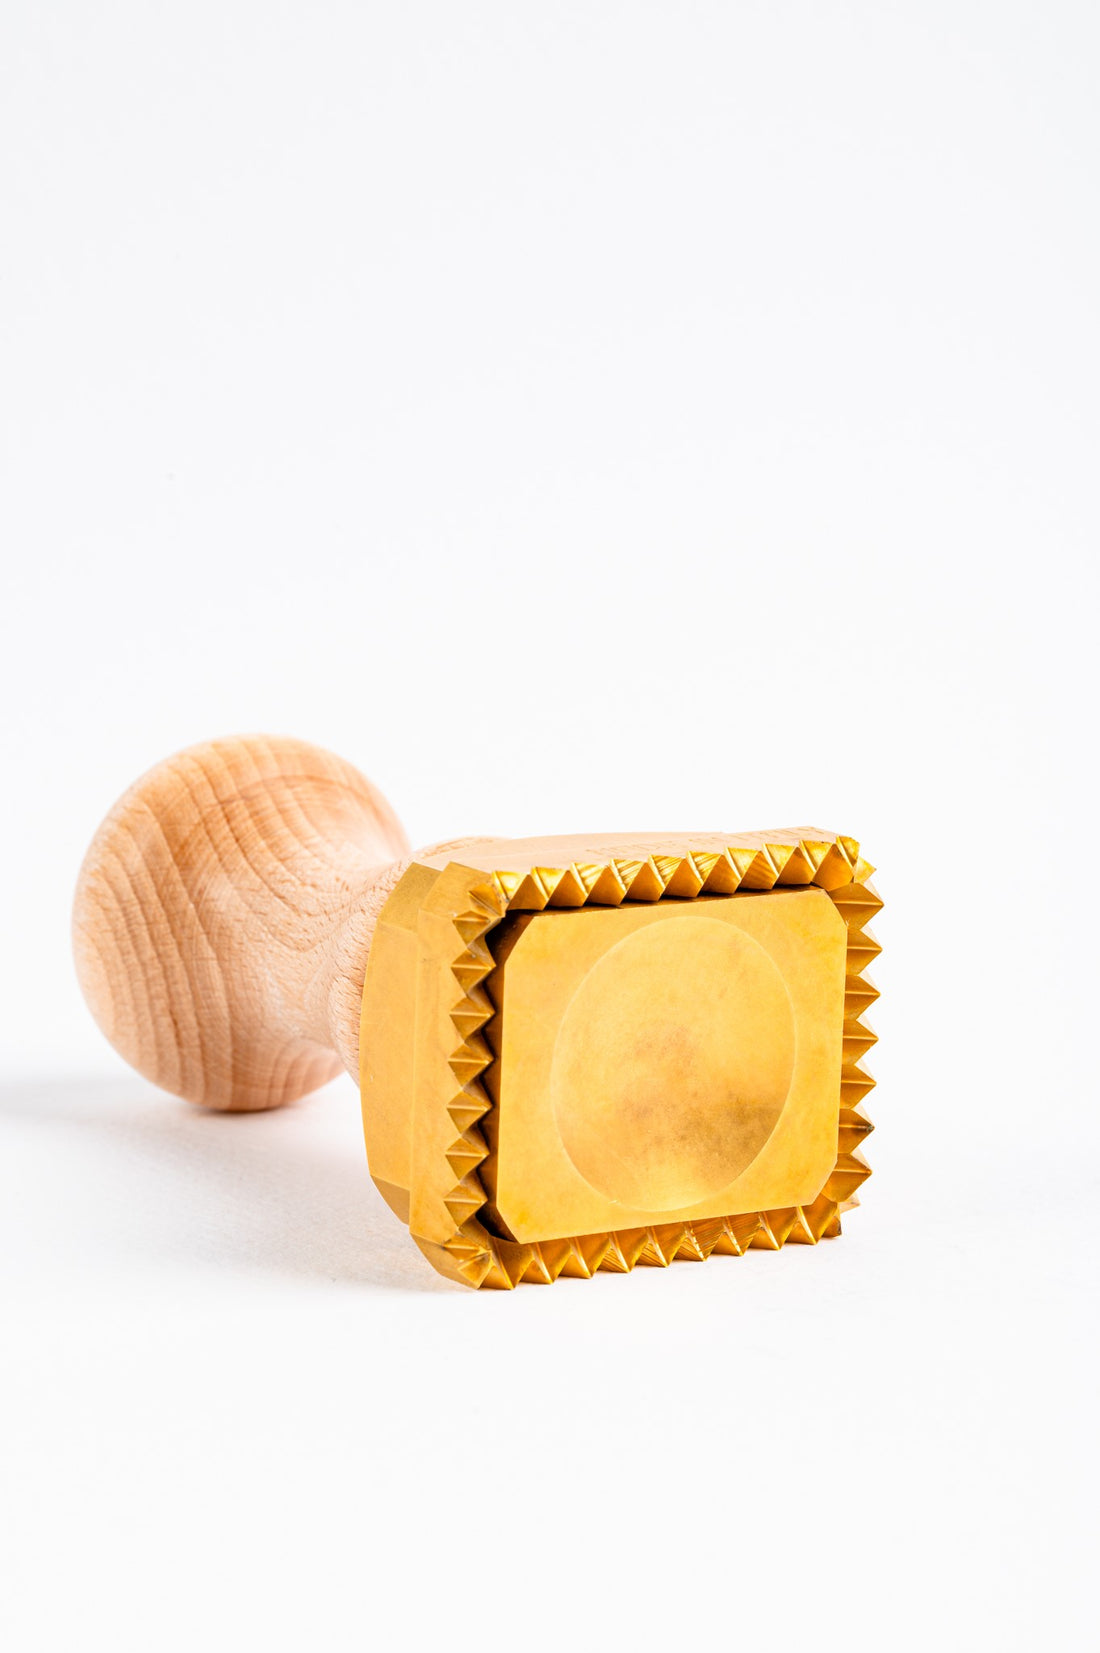 Professional Ravioli &amp; Tortelli Fluted Rectangle (45×55) Stamp in Brass and Natural wood.